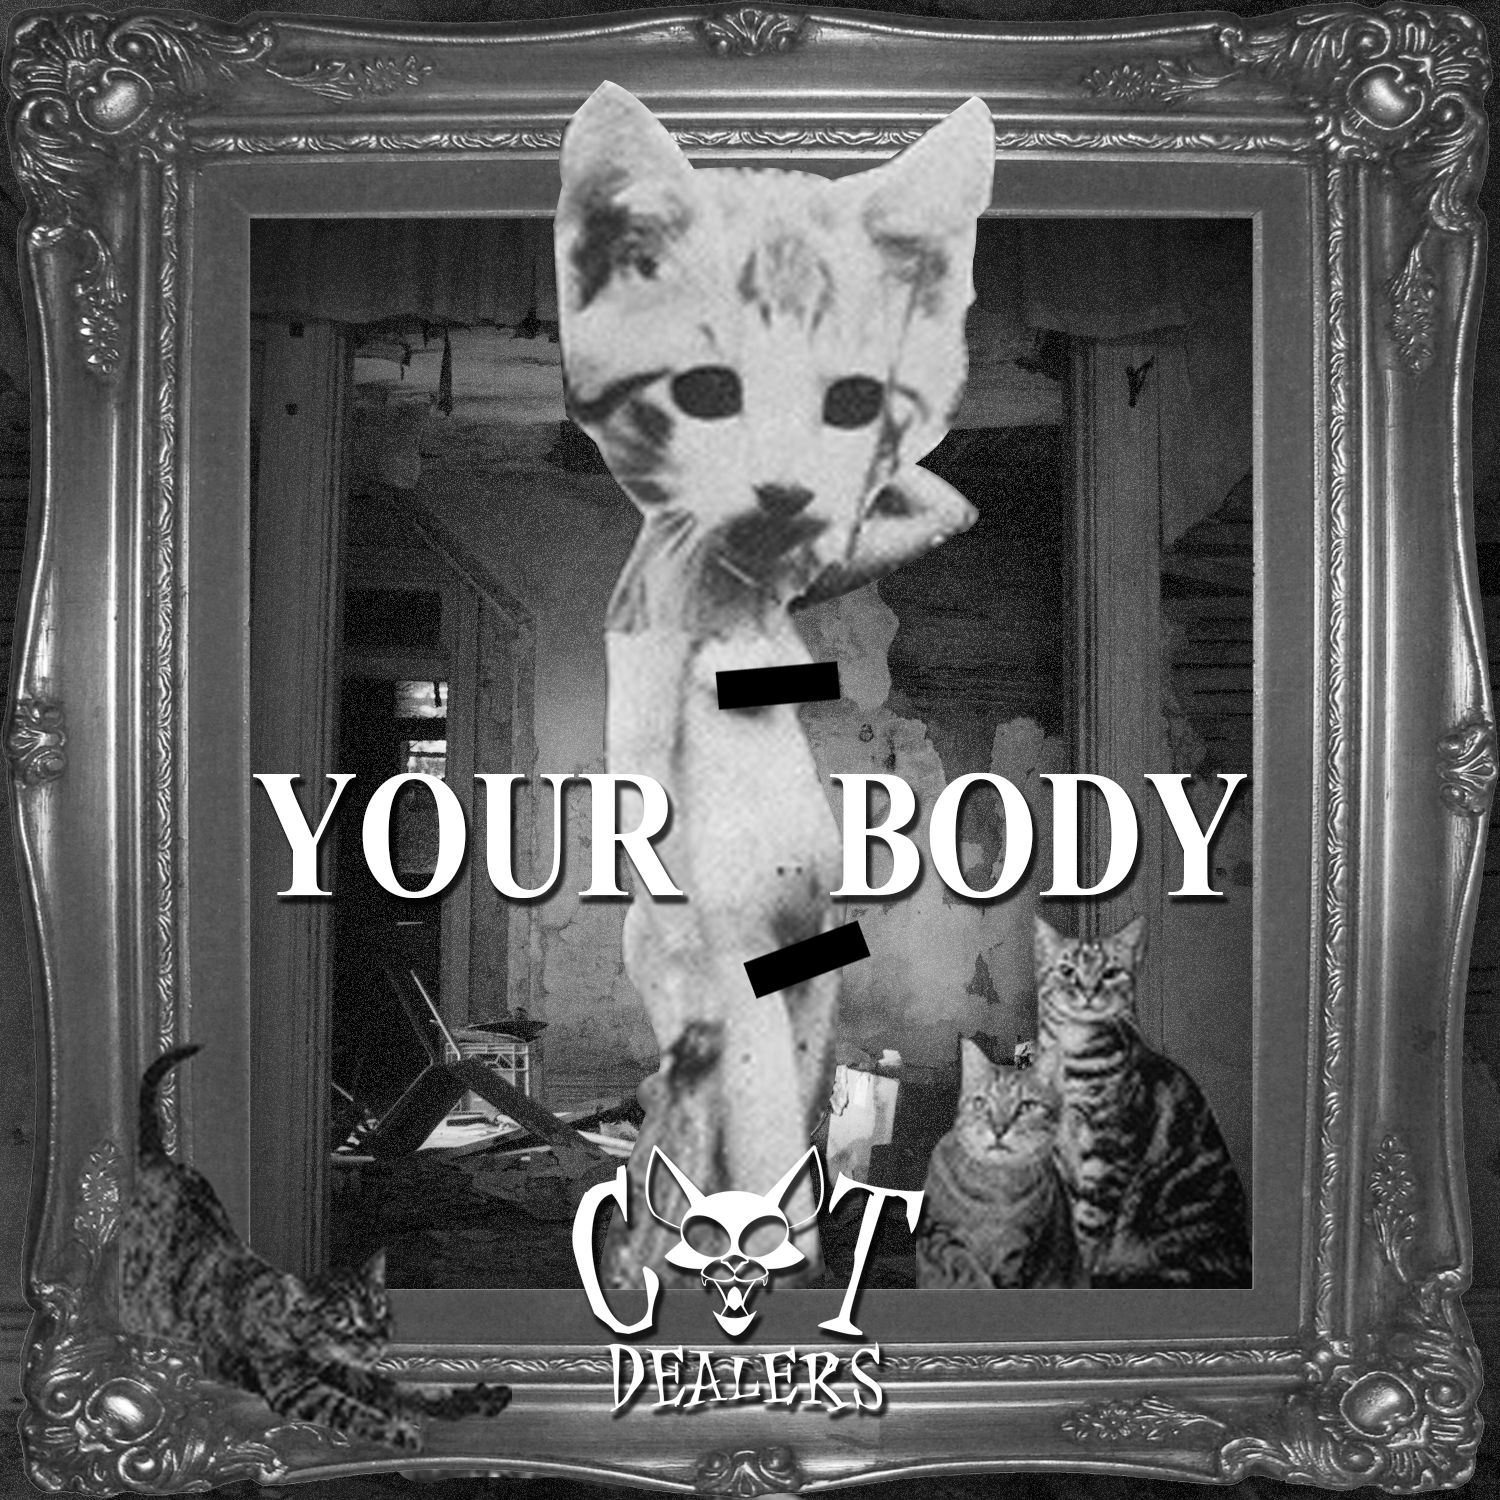 Download Cat Dealers - Your Body by Cat Dealers